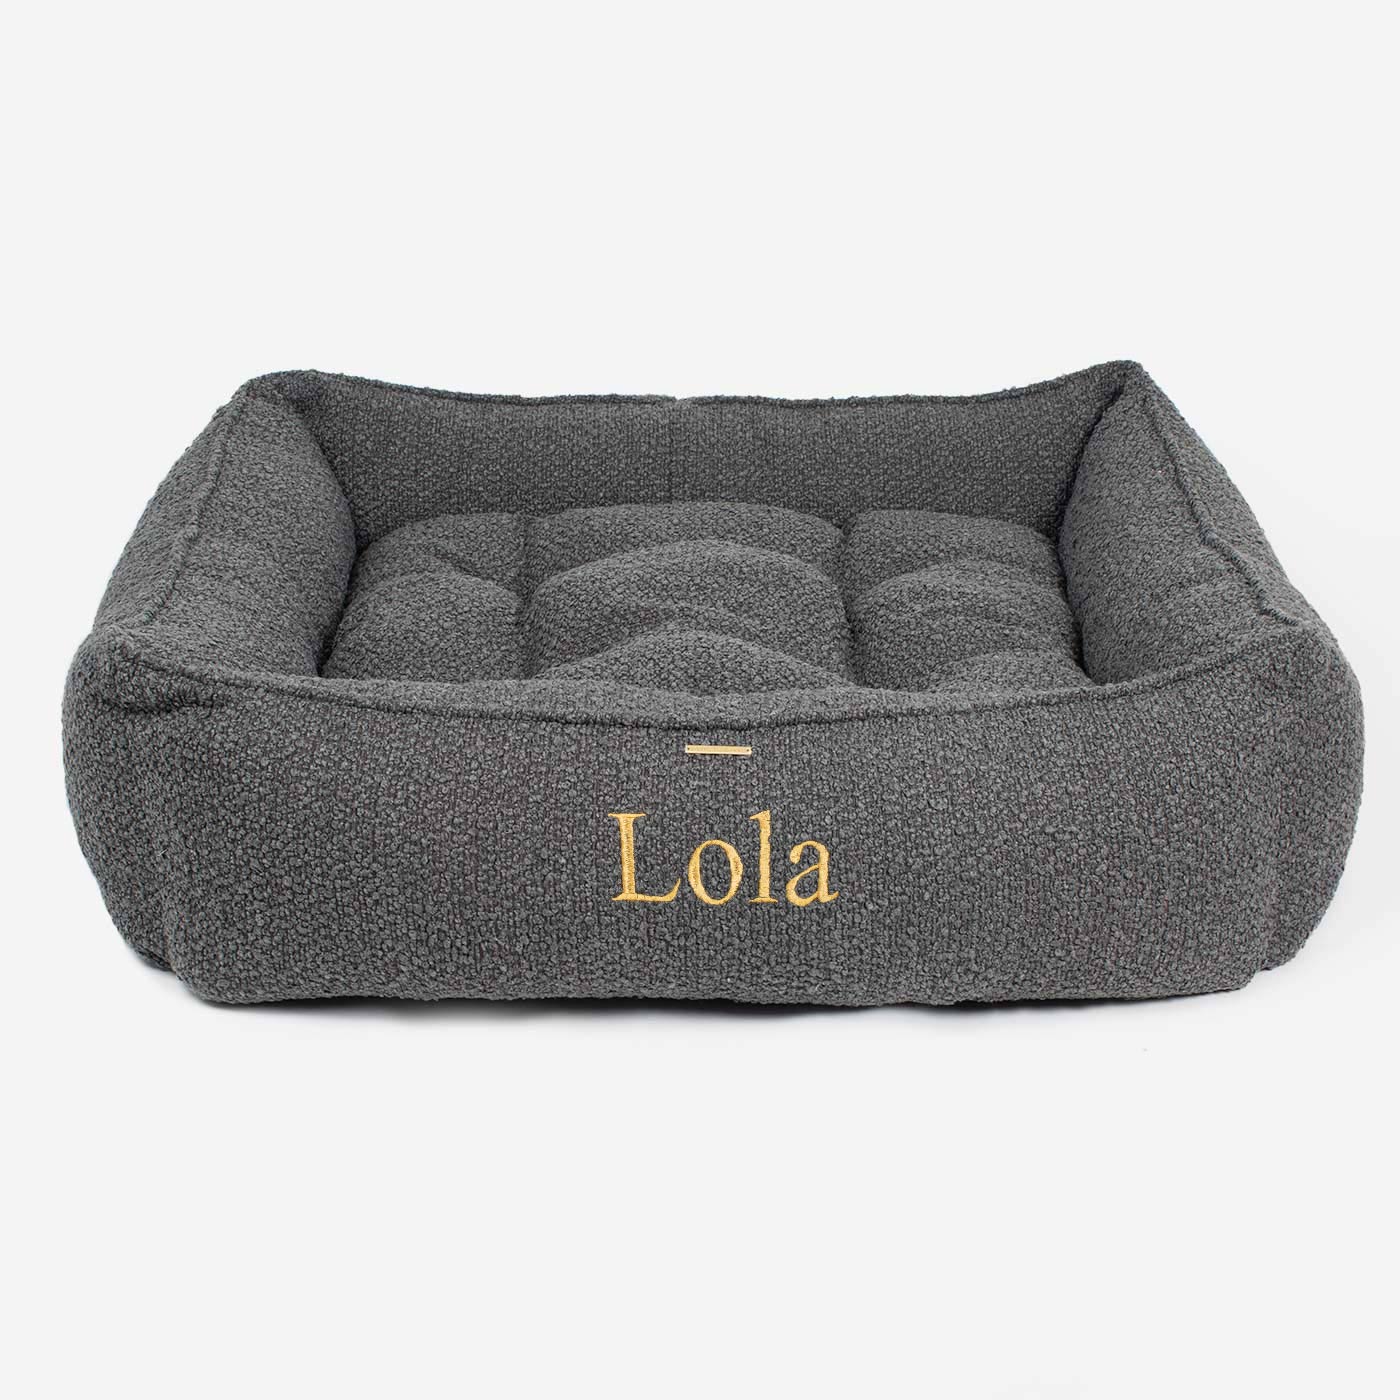 Luxury Handmade Box Bed For Dogs in Granite Boucle, Perfect For Your Pets Nap Time! Available To Personalize at Lords & Labradors US